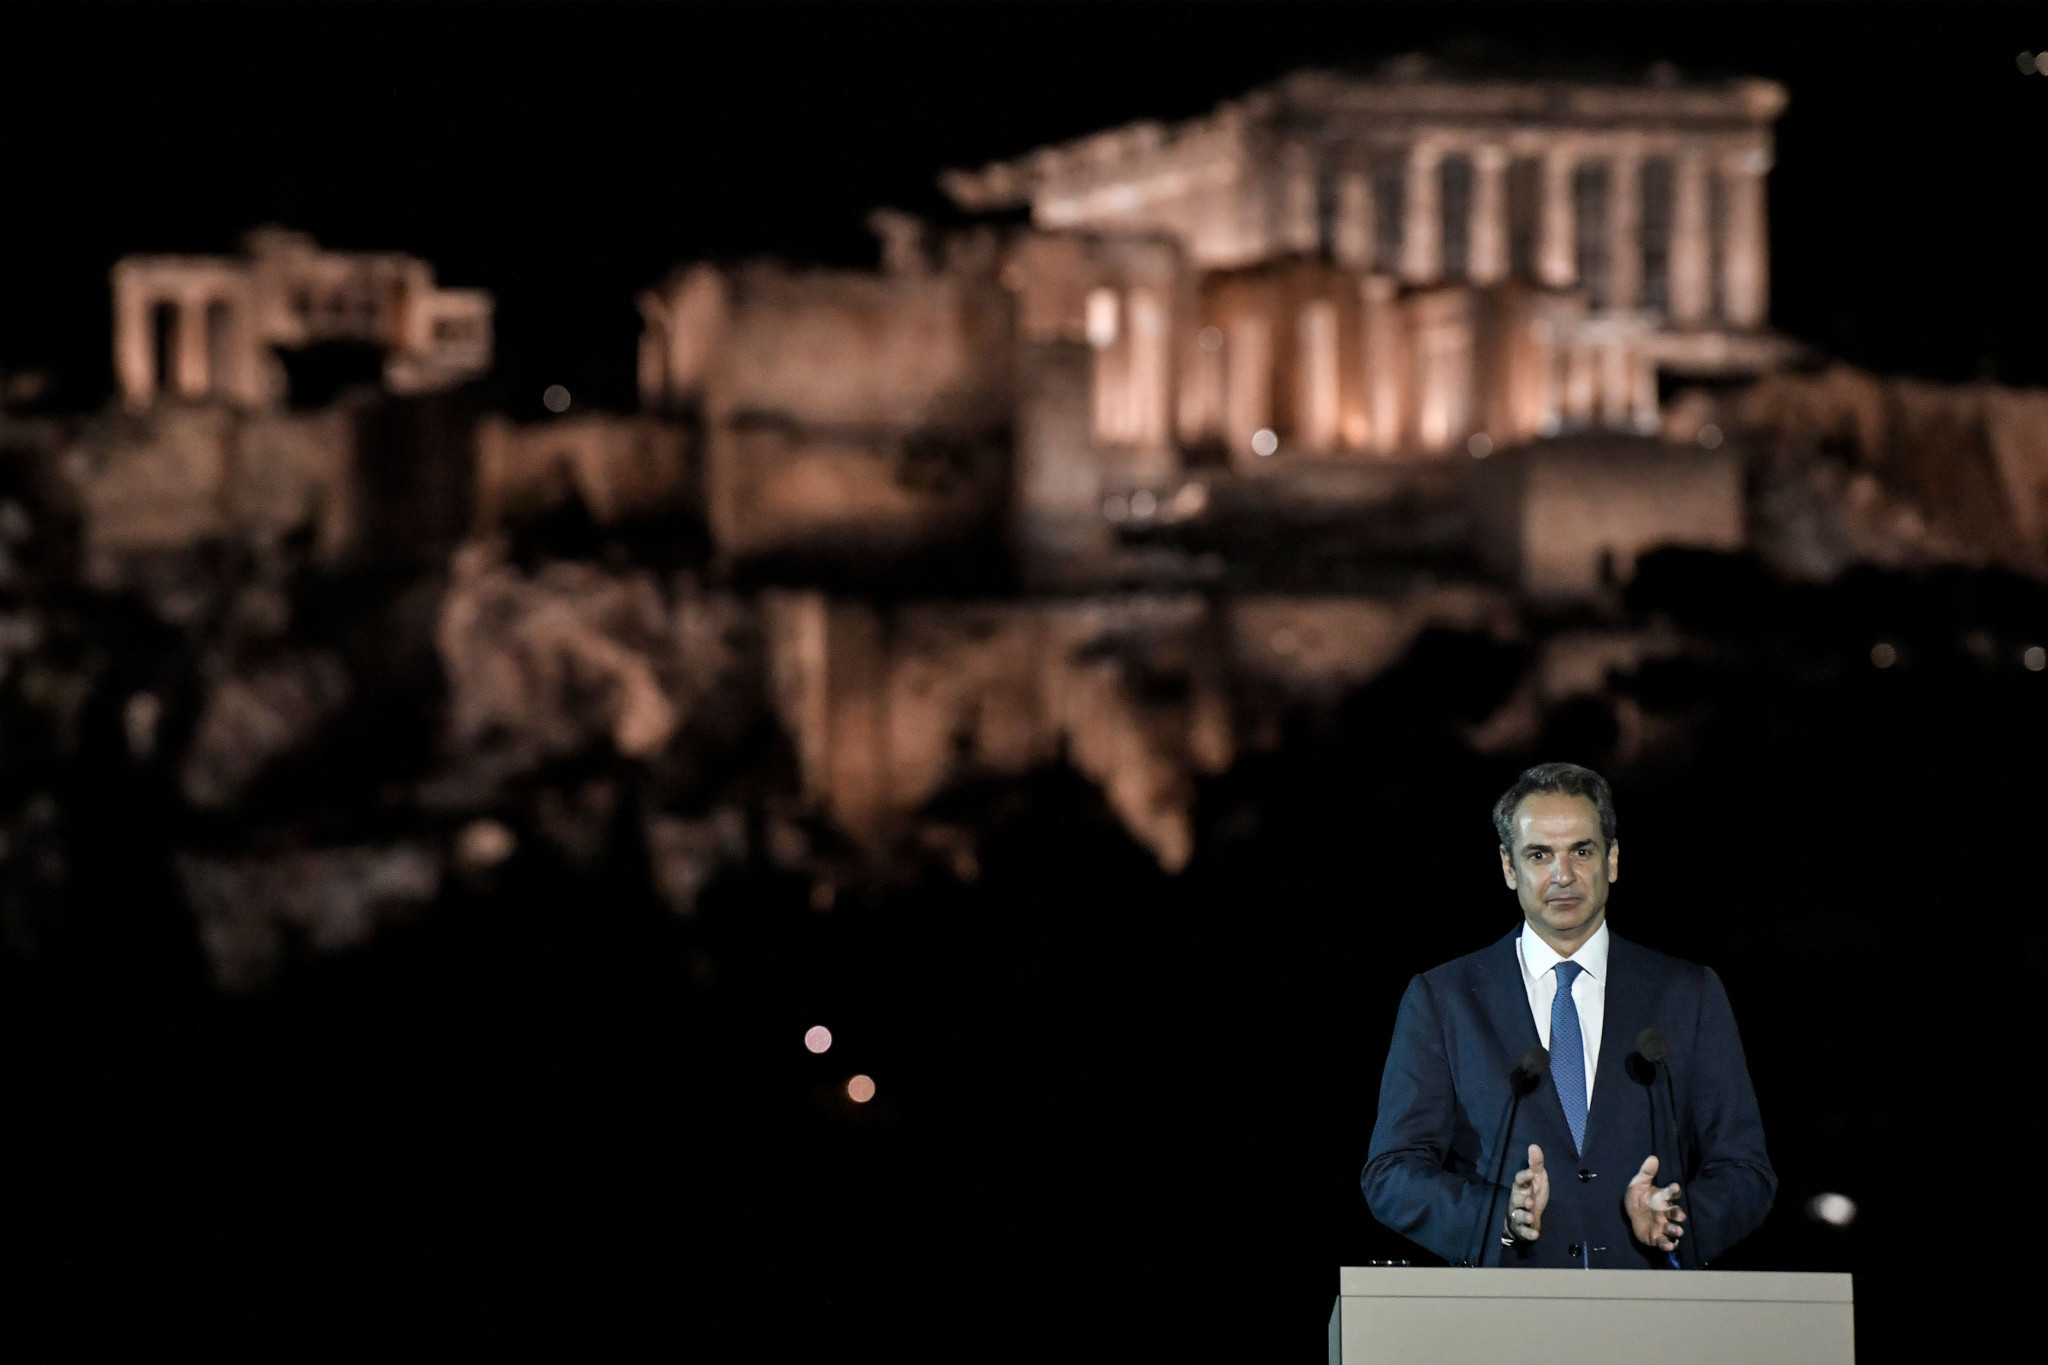 Greece Prime Minister Kyriakos Mitsotakis is set to visit the site of the ancient Olympic Games, close to where wildfires have forced the evacuation of villagers ©Getty Images